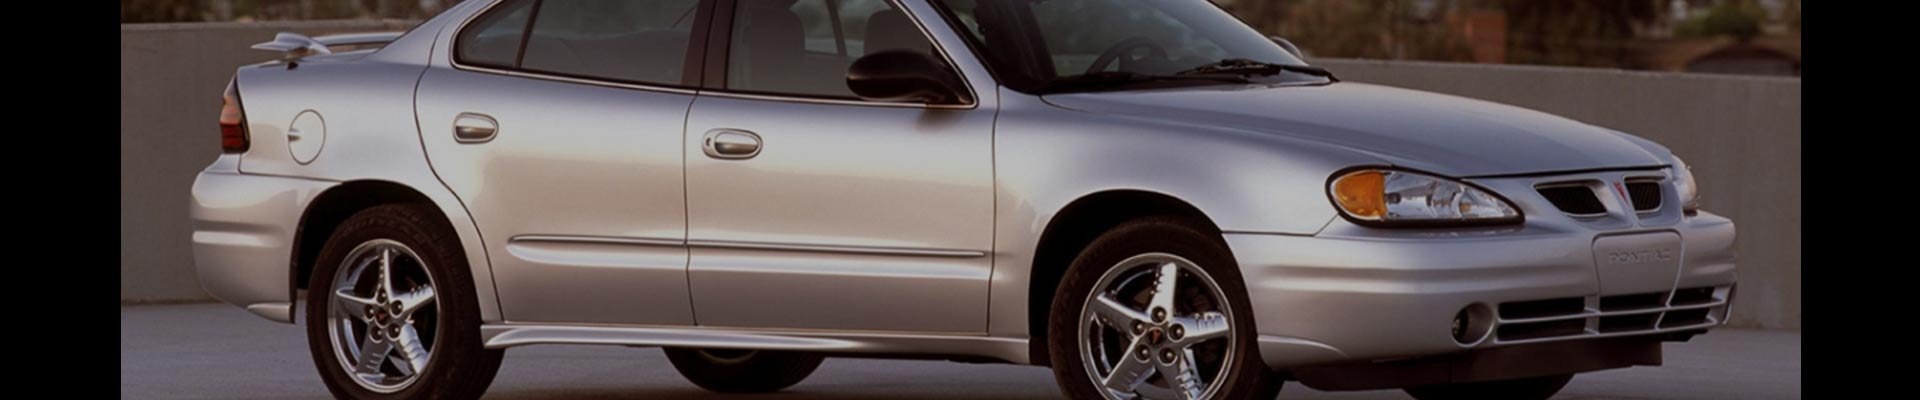 Shop Replacement and OEM 1996 Pontiac Grand Am Parts with Discounted Price on the Net